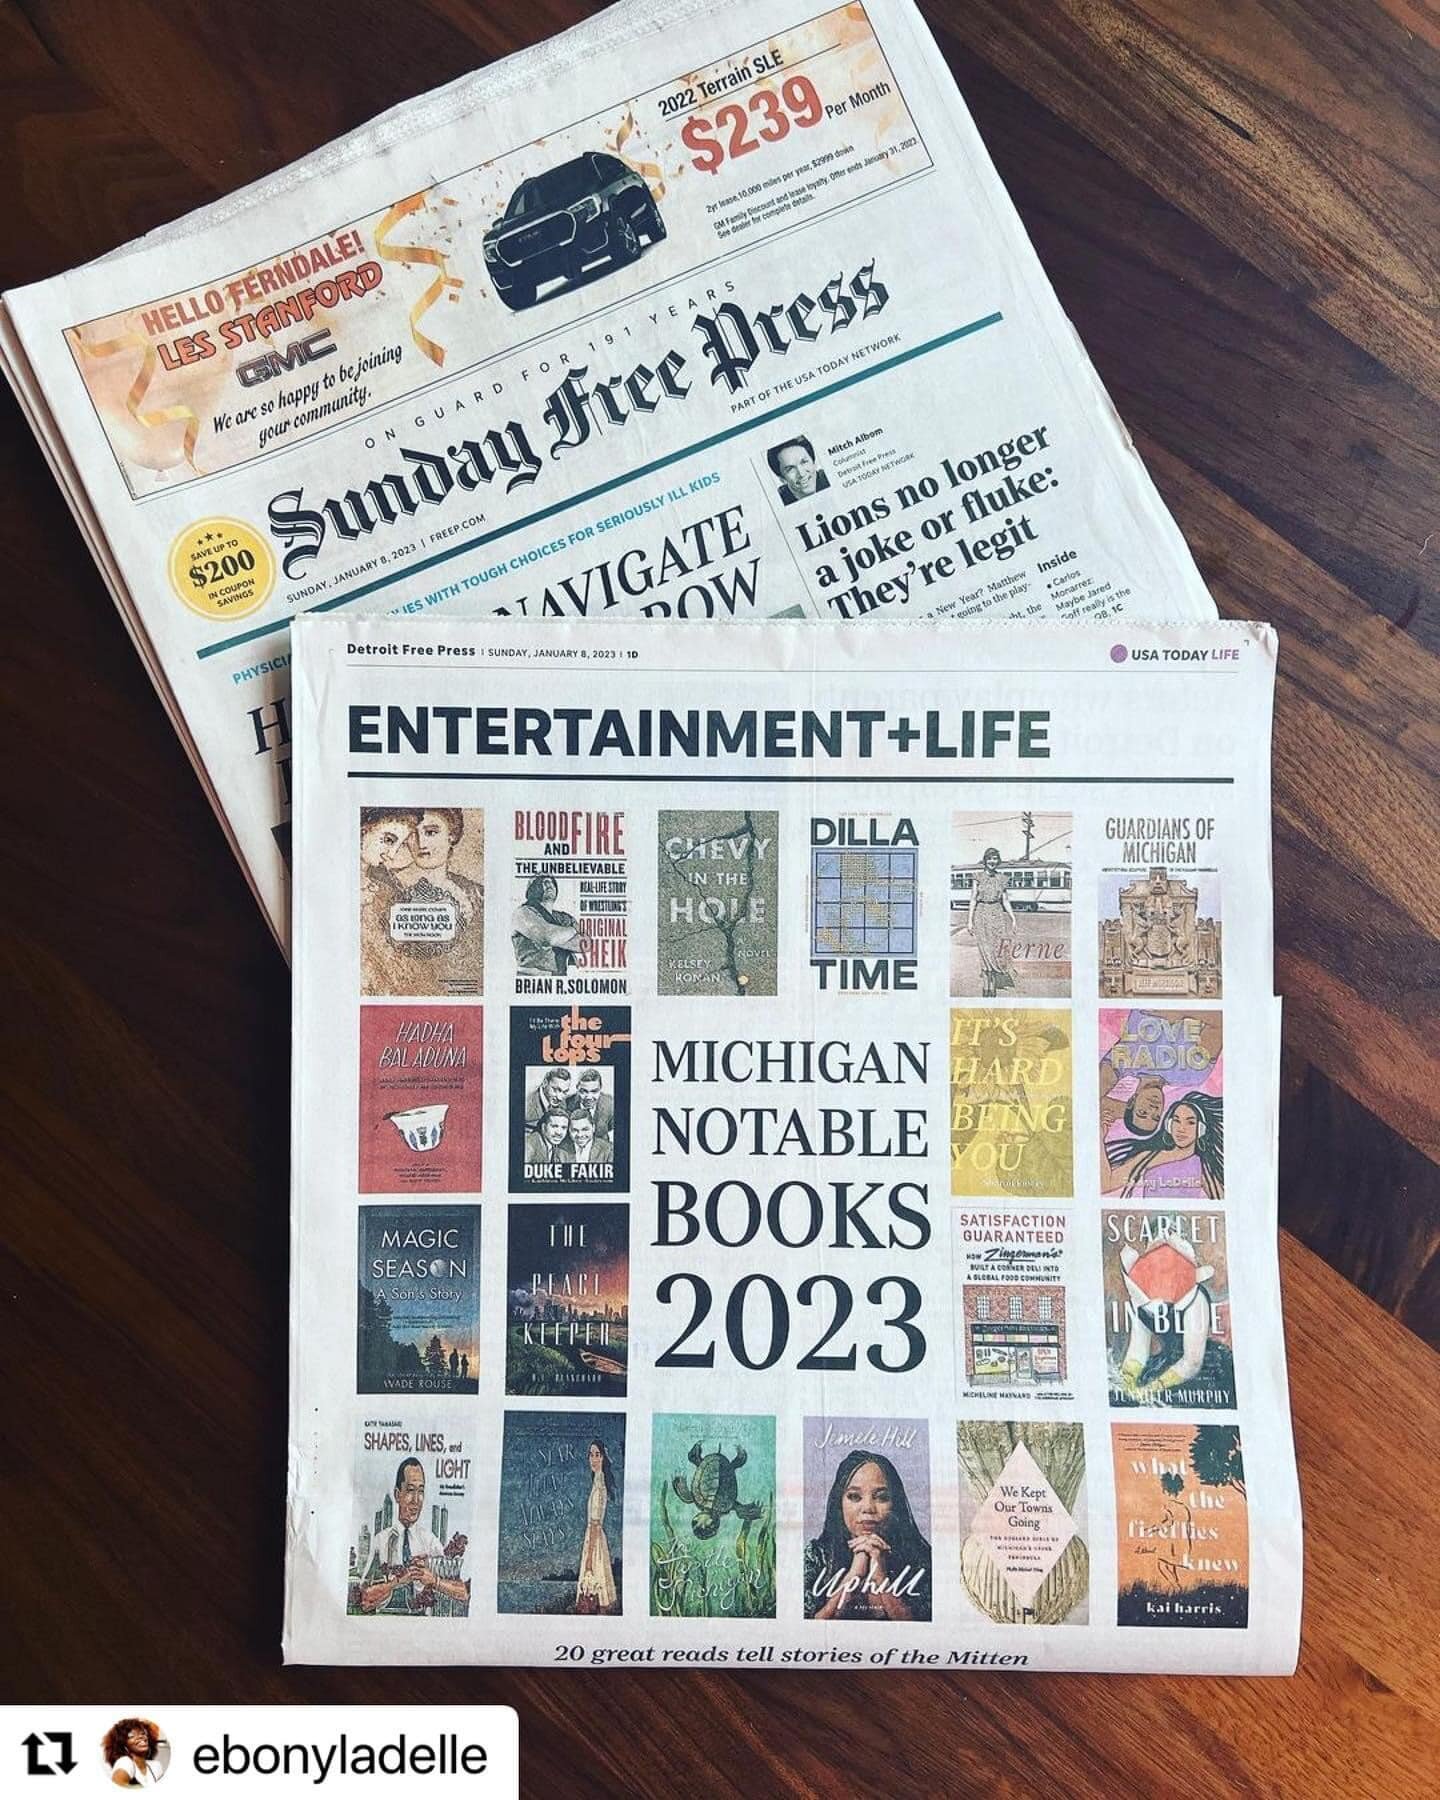 So grateful for this honor. Looking forward to this weekend and meeting all the other authors! Thank you Michigan Notable Books! Dutton, Penguin Random House Penguin Random House @duttonbooks #scarletinblue